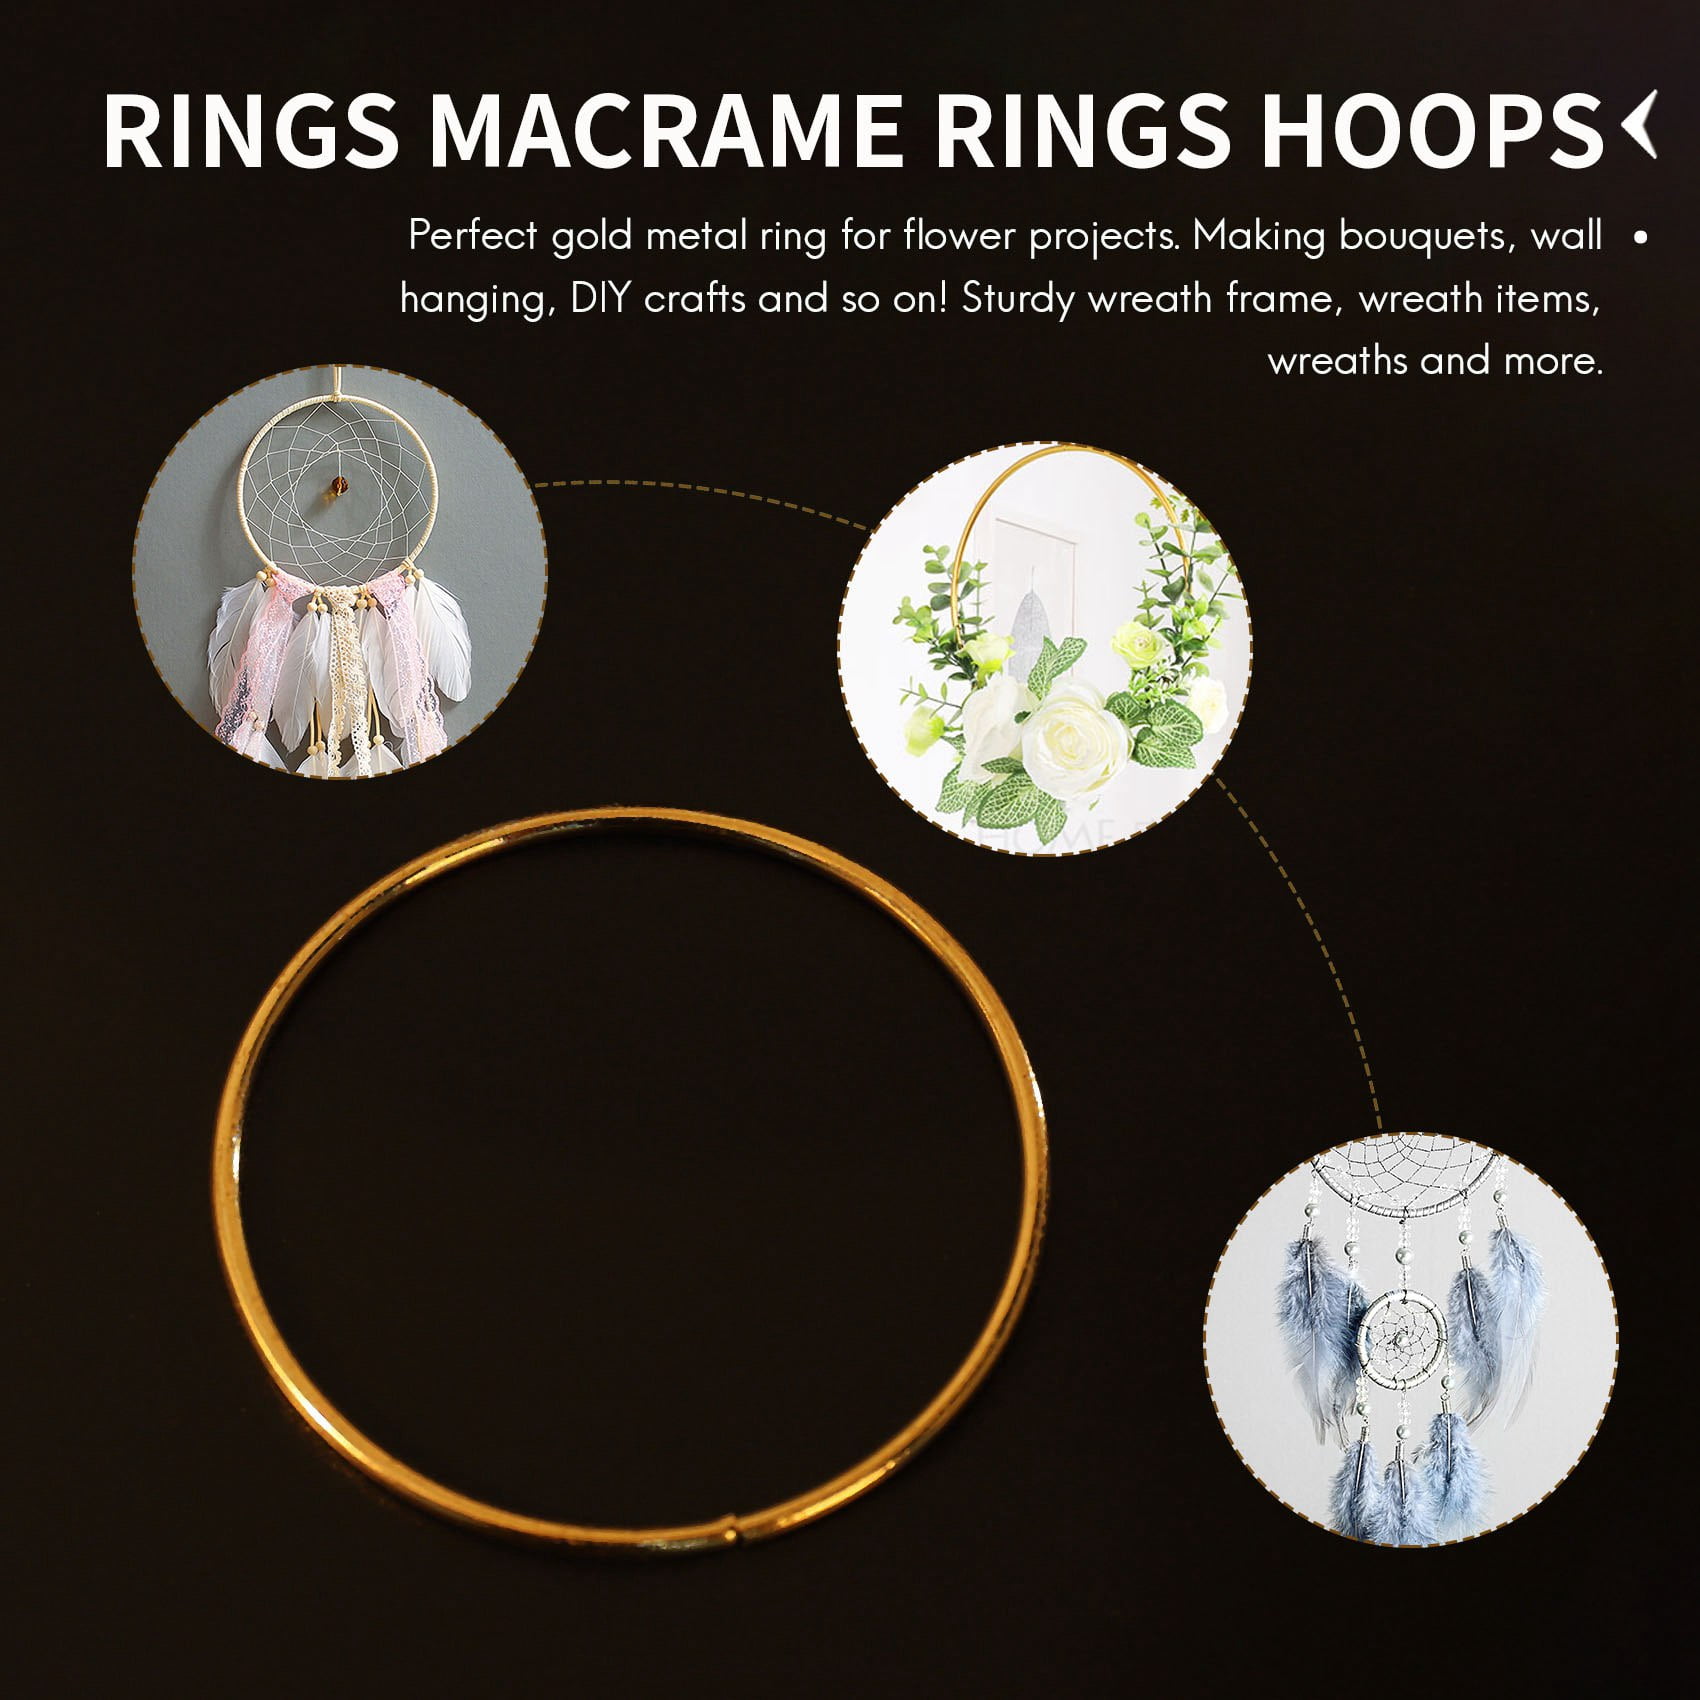 10 Pcs 5 Inch Dream Catcher Rings Metal Craft Rings Hoops Gold Macrame  Hoops Rings for Macrame,DIY Craft and Dream Catcher Supplies